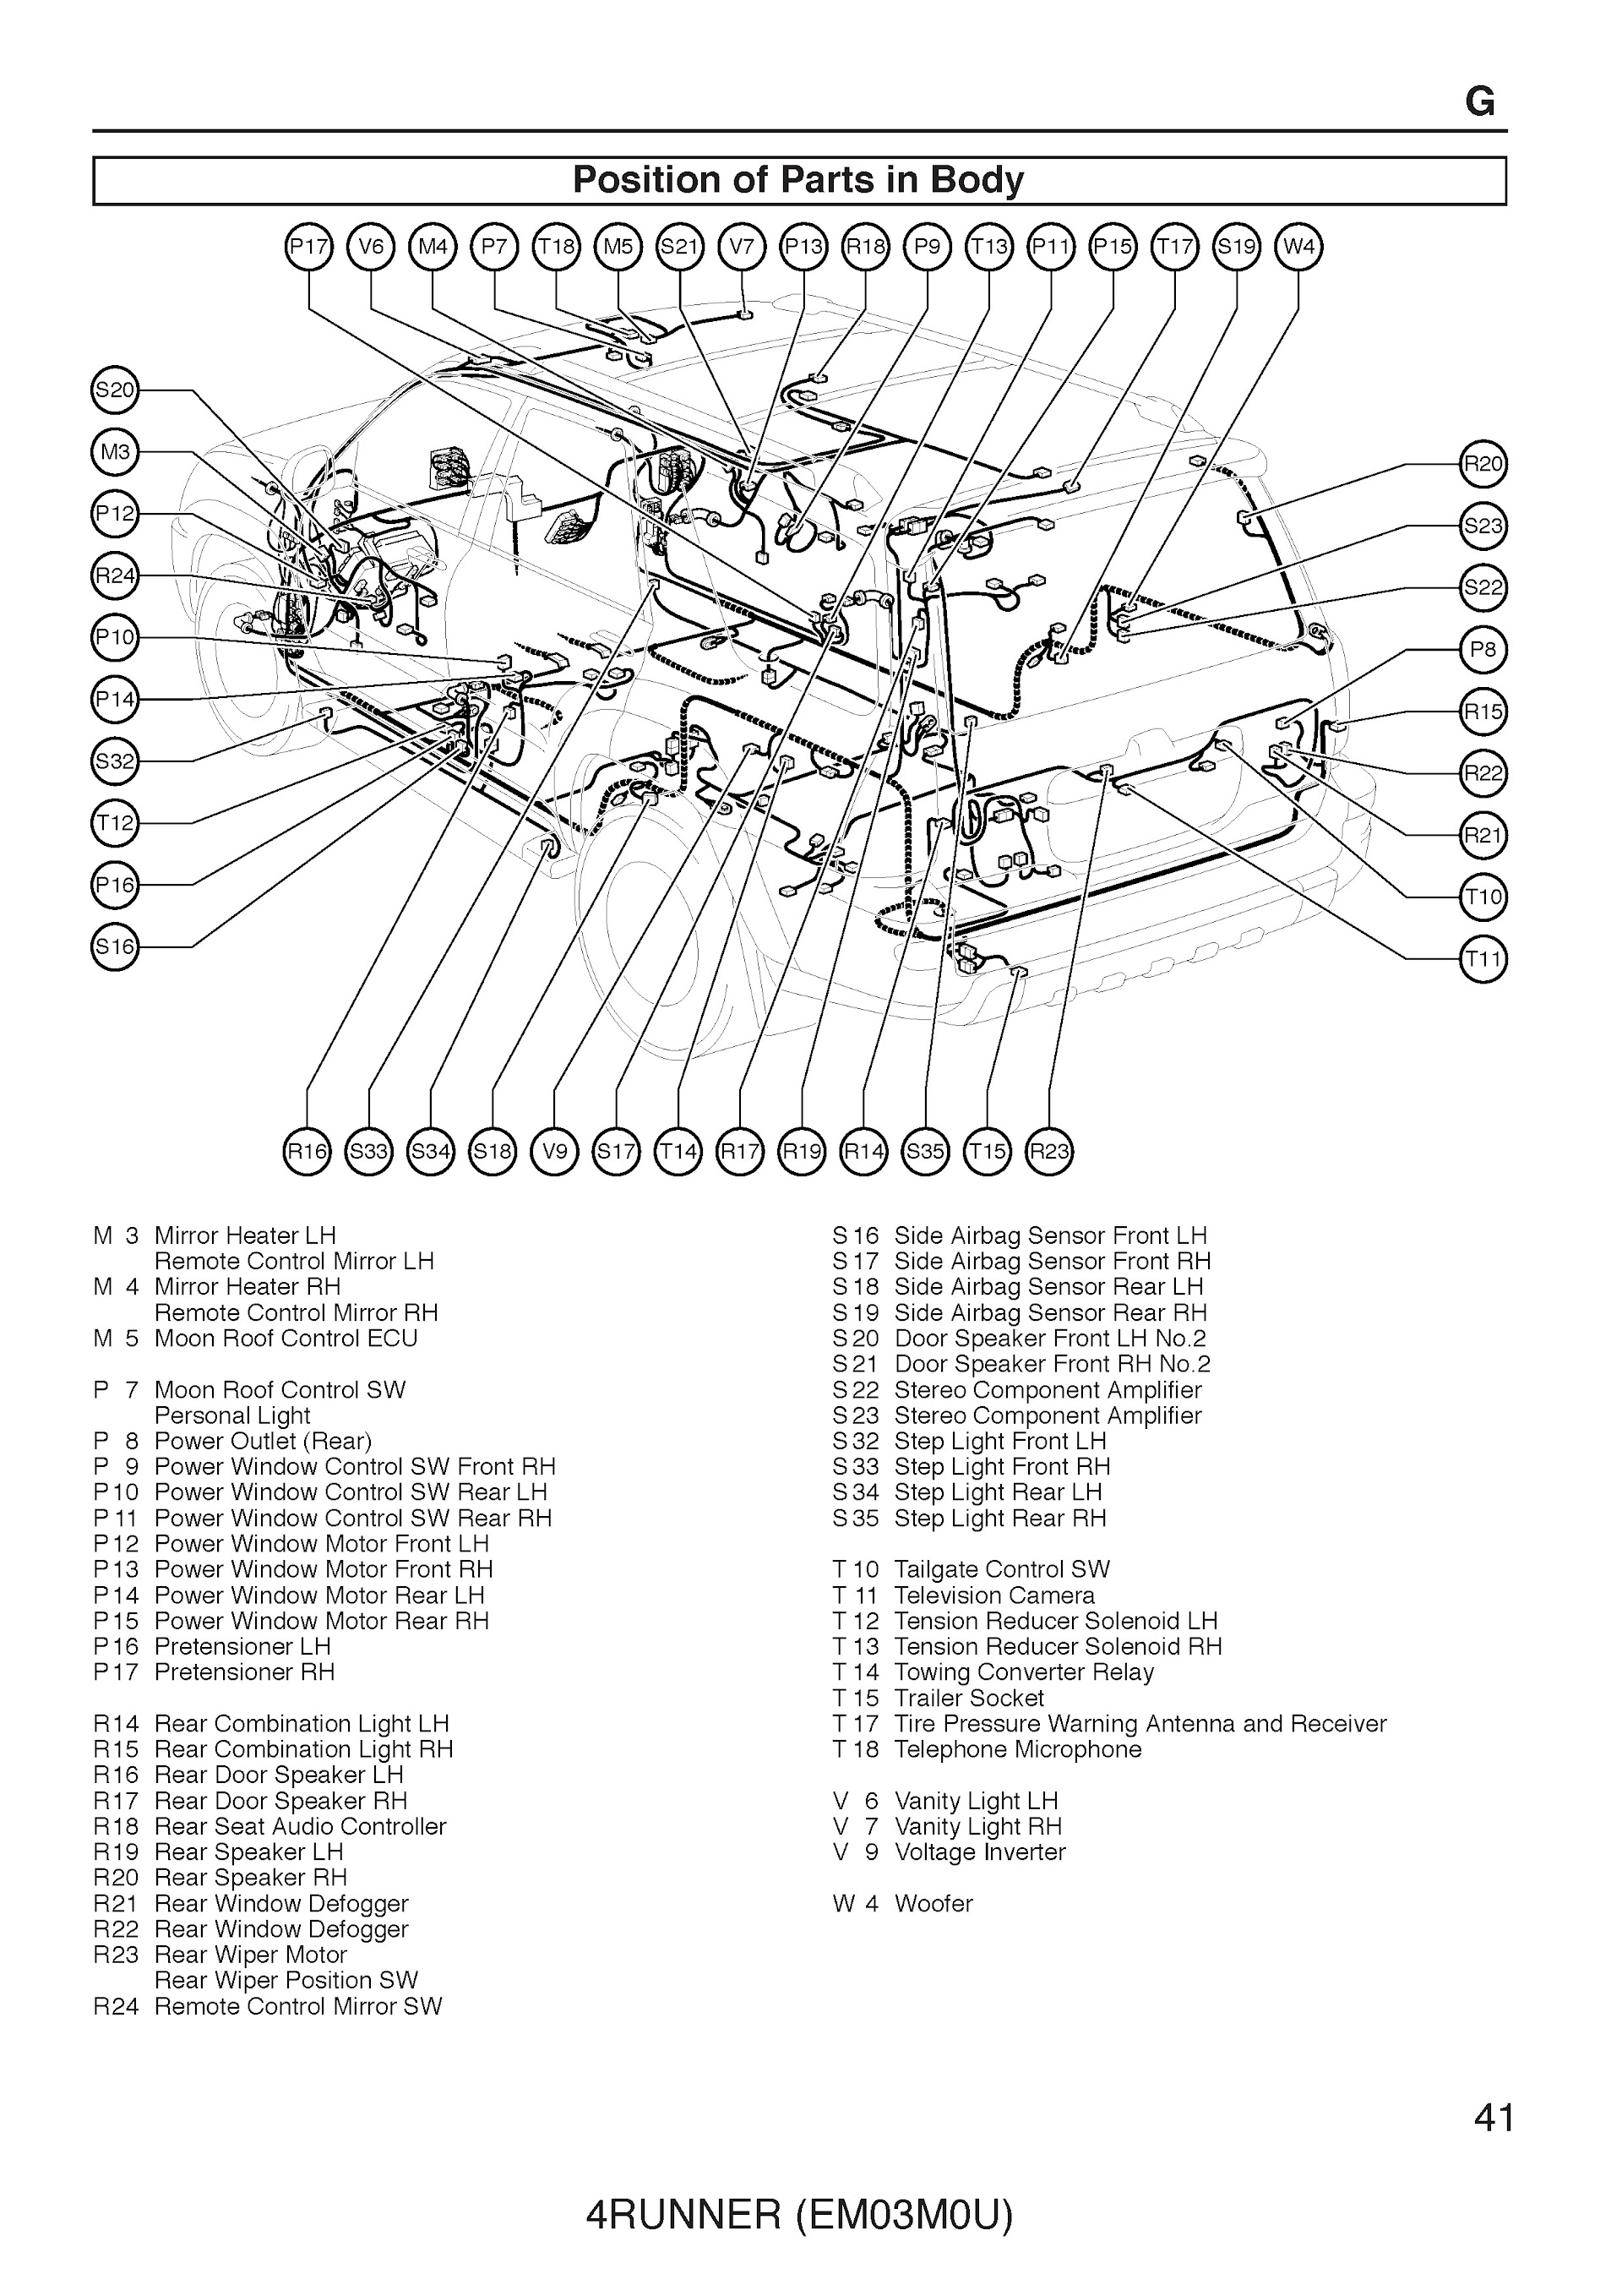 Toyota 4Runner Repair Manual, Position of Parts in Body